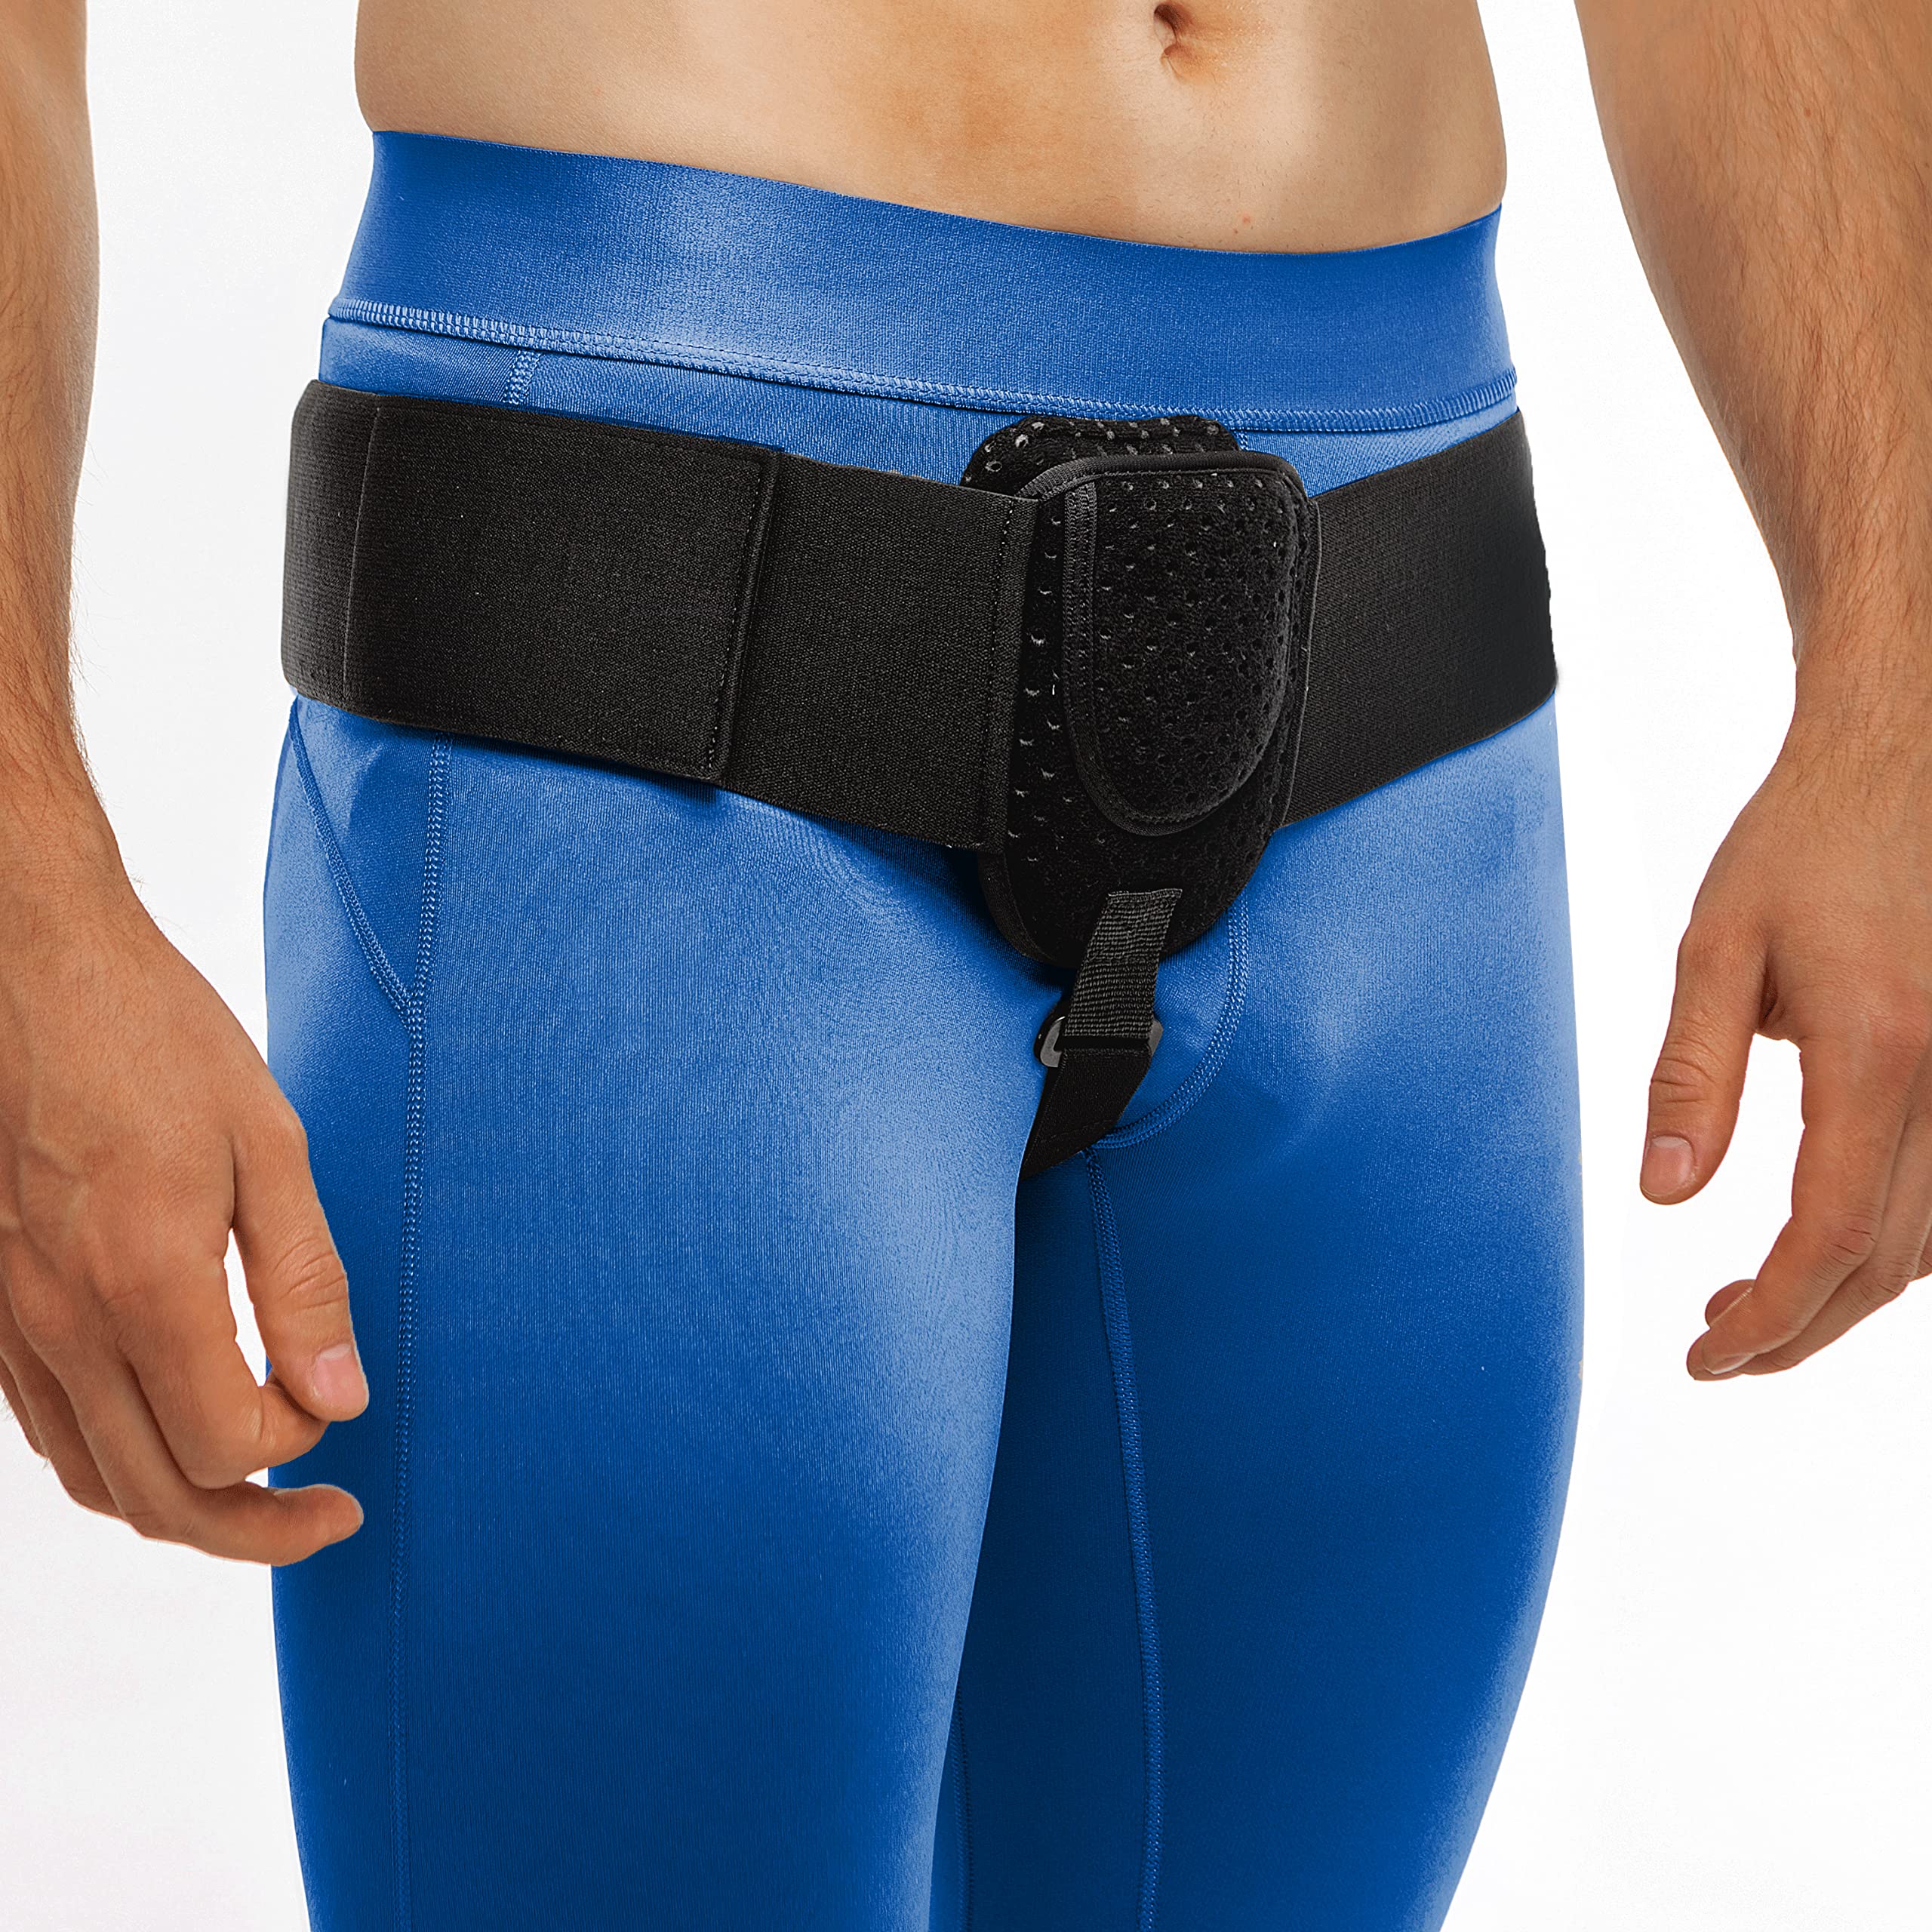 Do Hernia Belts Work? - Is It Safe to Use a Hernia Belt Or Truss